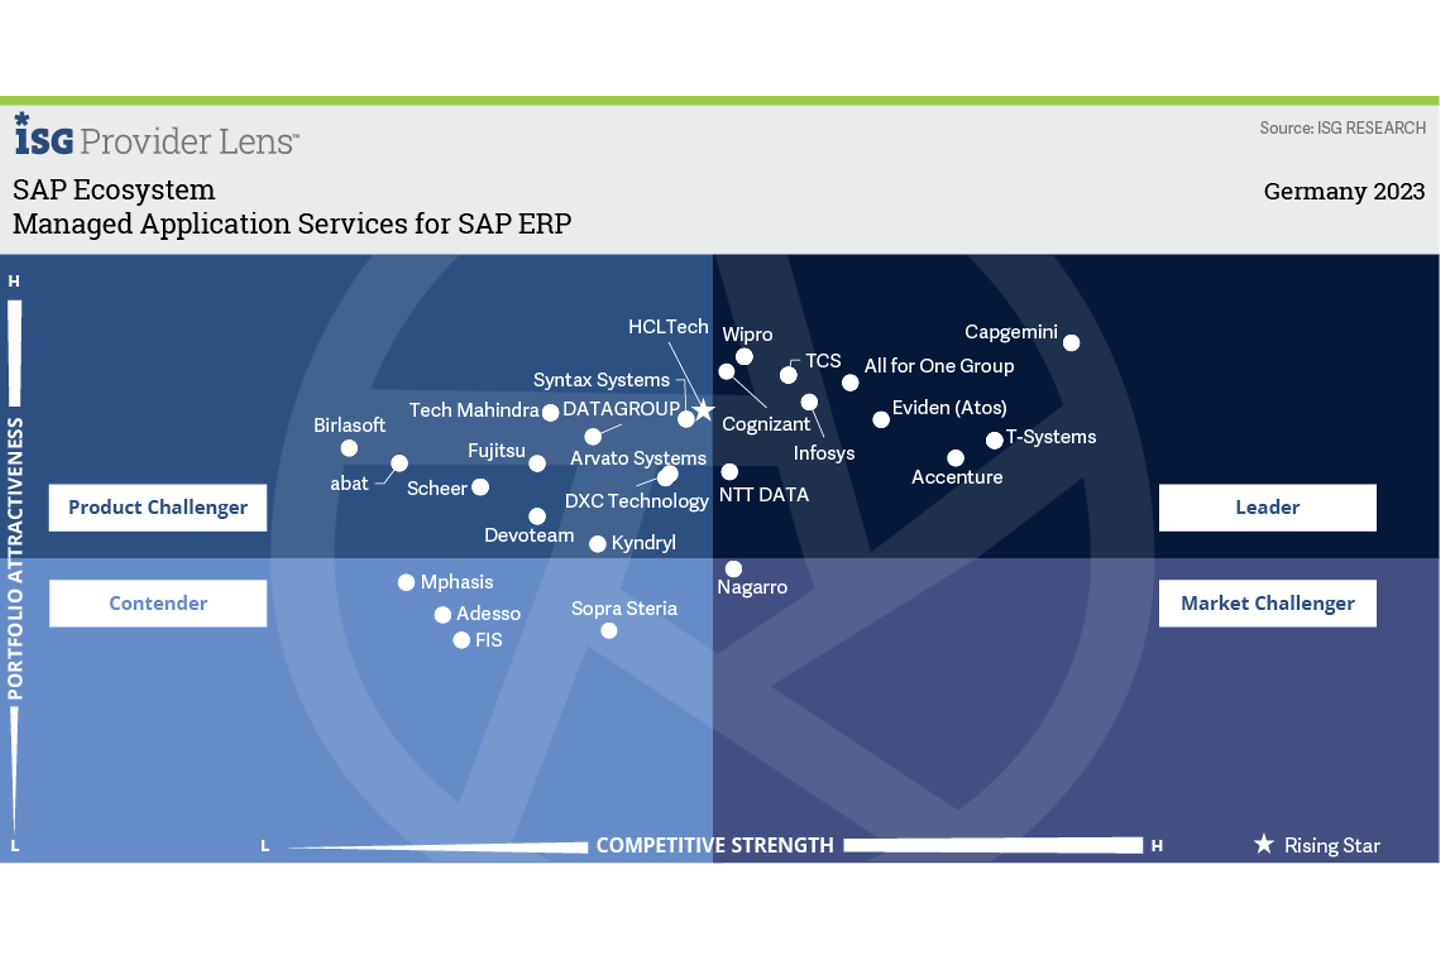 Graphic Proven Leader for Managed Application Services for SAP ERP